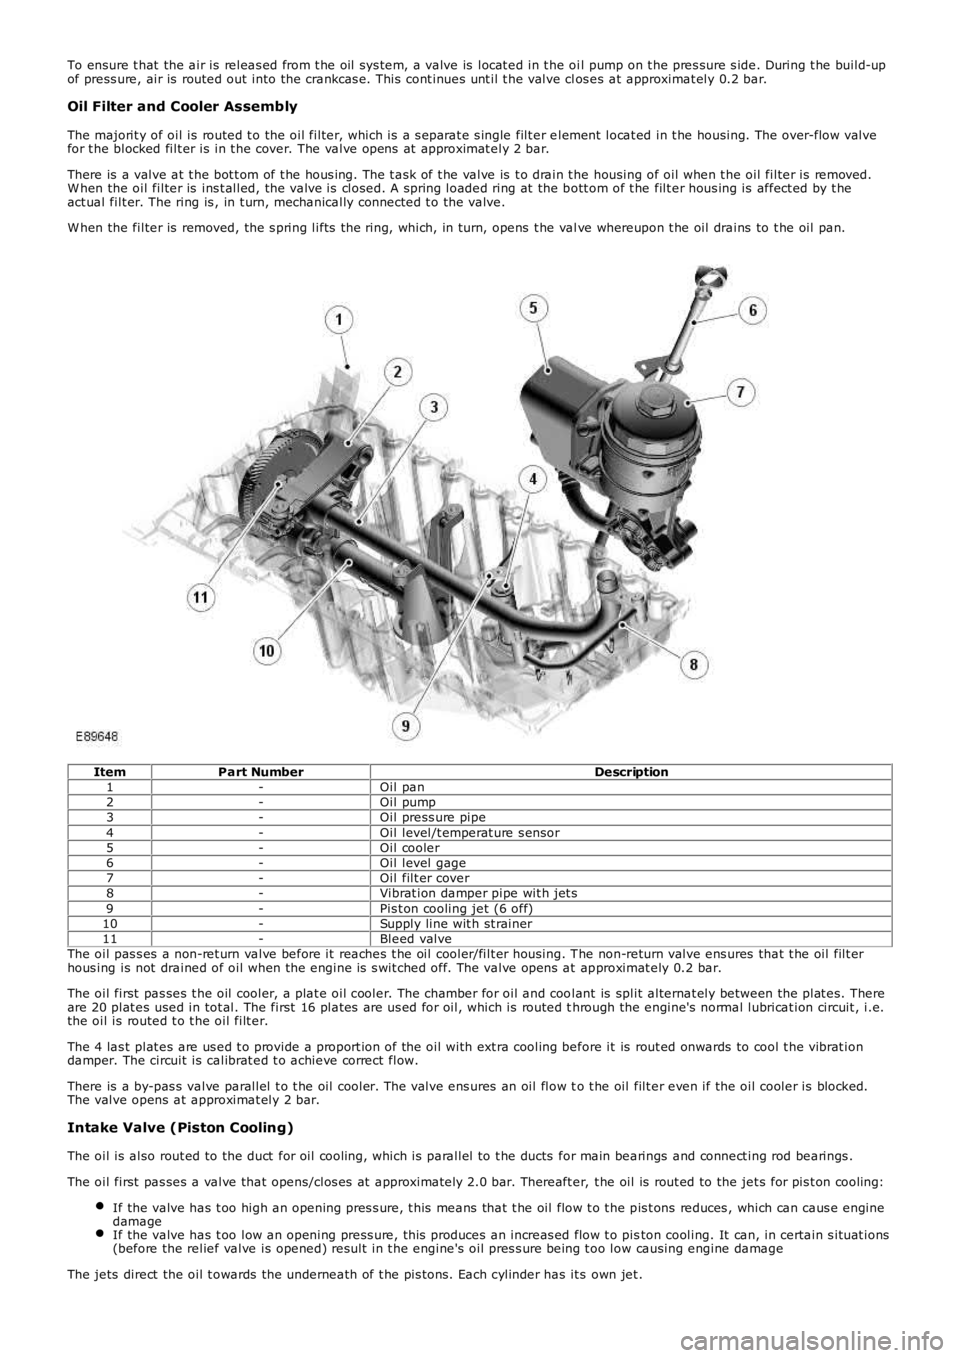 LAND ROVER FRELANDER 2 2006  Repair Manual To ensure t hat  the air is  releas ed from t he oil sys tem, a valve is  locat ed in t he oil pump on t he pres sure s ide. During t he build-upof press ure, air is  routed out into the crankcas e. T